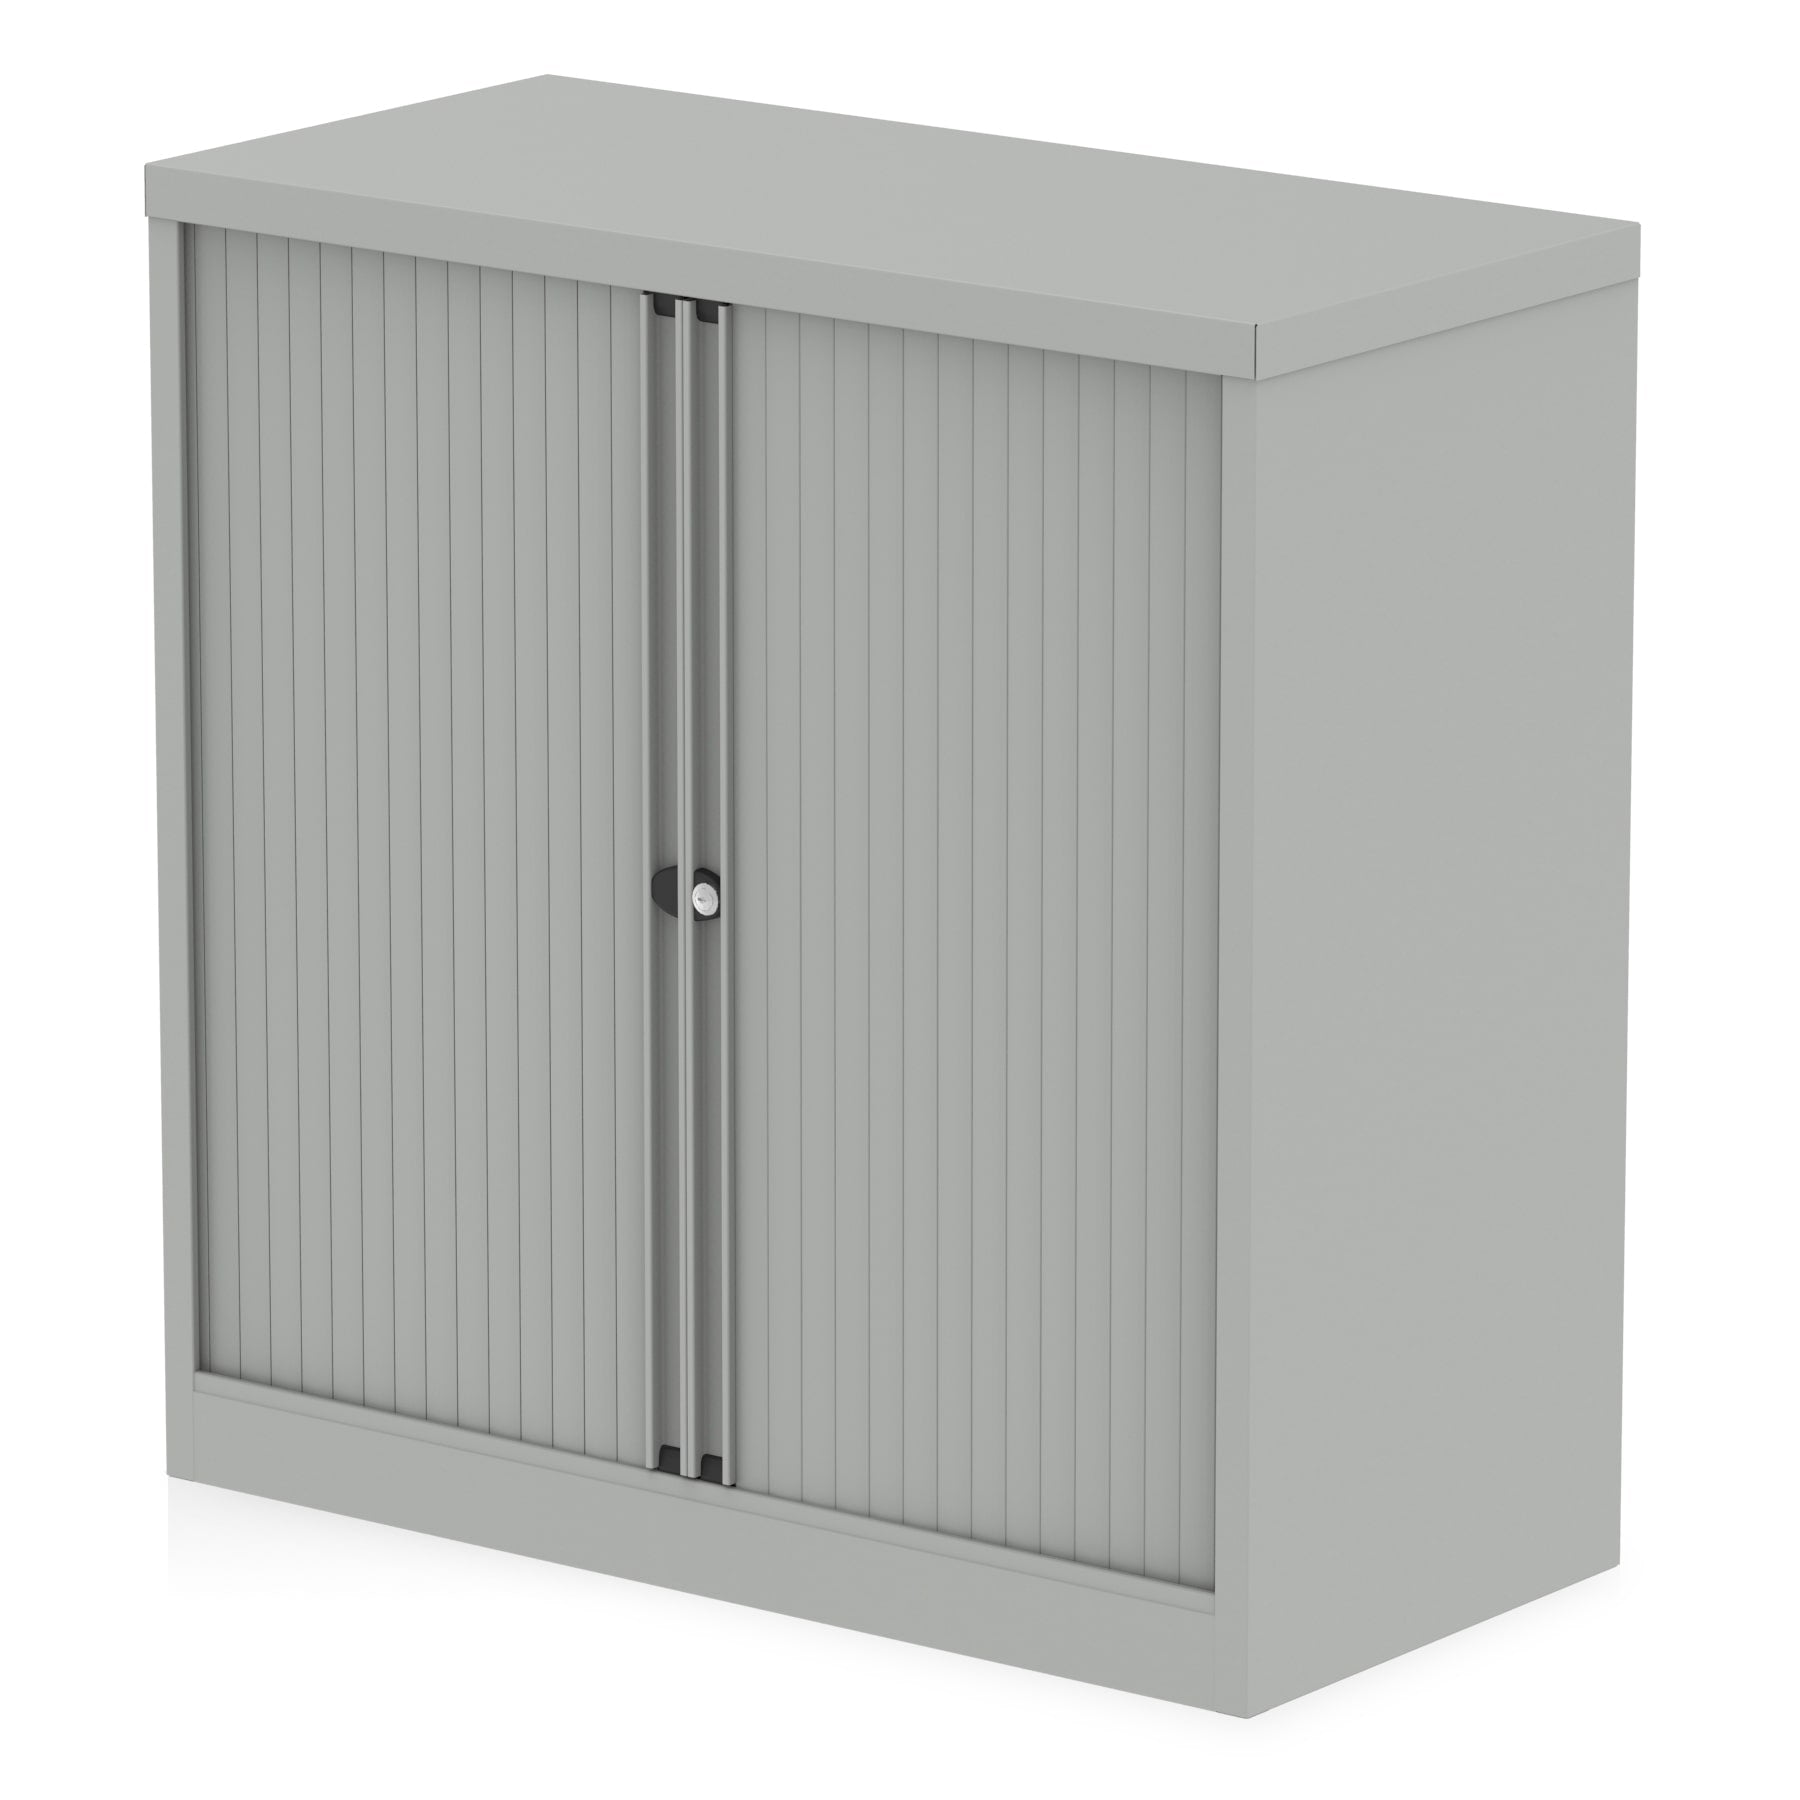 Bisley Qube Tambour Cupboard - Steel, Lockable, 1000x470mm (Available in 2 Heights: 1000mm & 1970mm) - 5 Year Guarantee